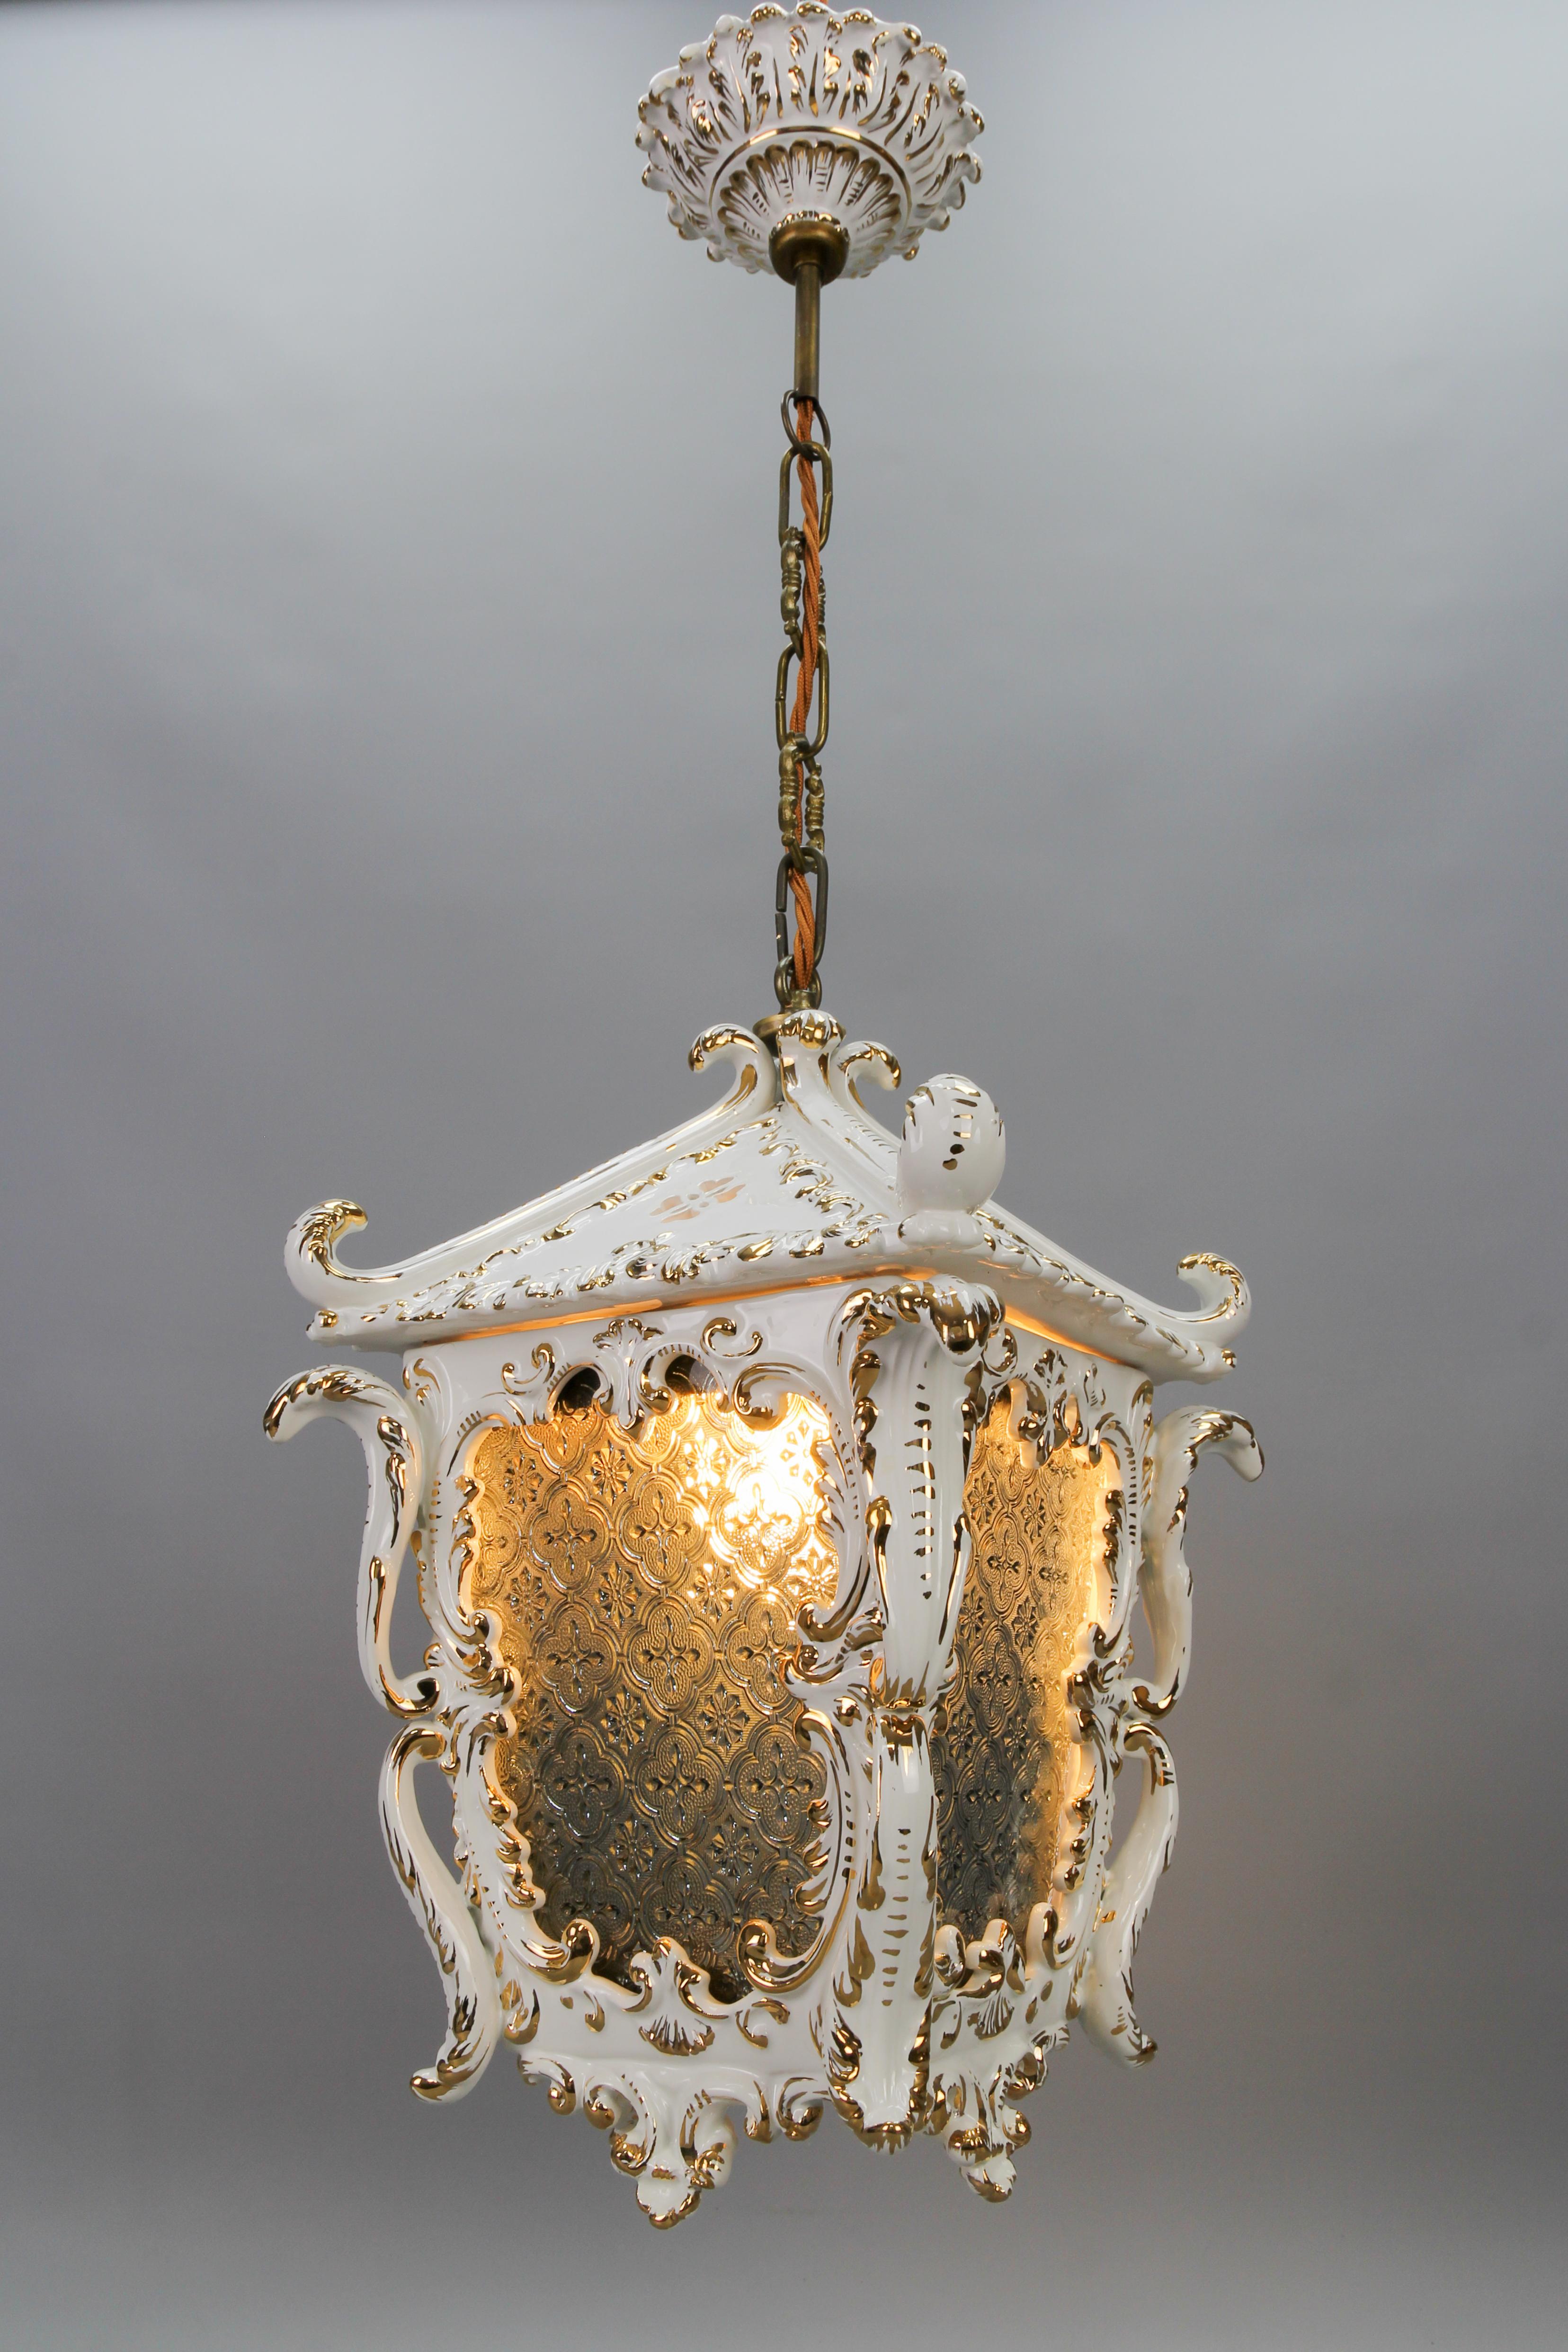 Painted Vintage French Rococo Style White Ceramic and Glass Hanging Lantern, 1970s For Sale